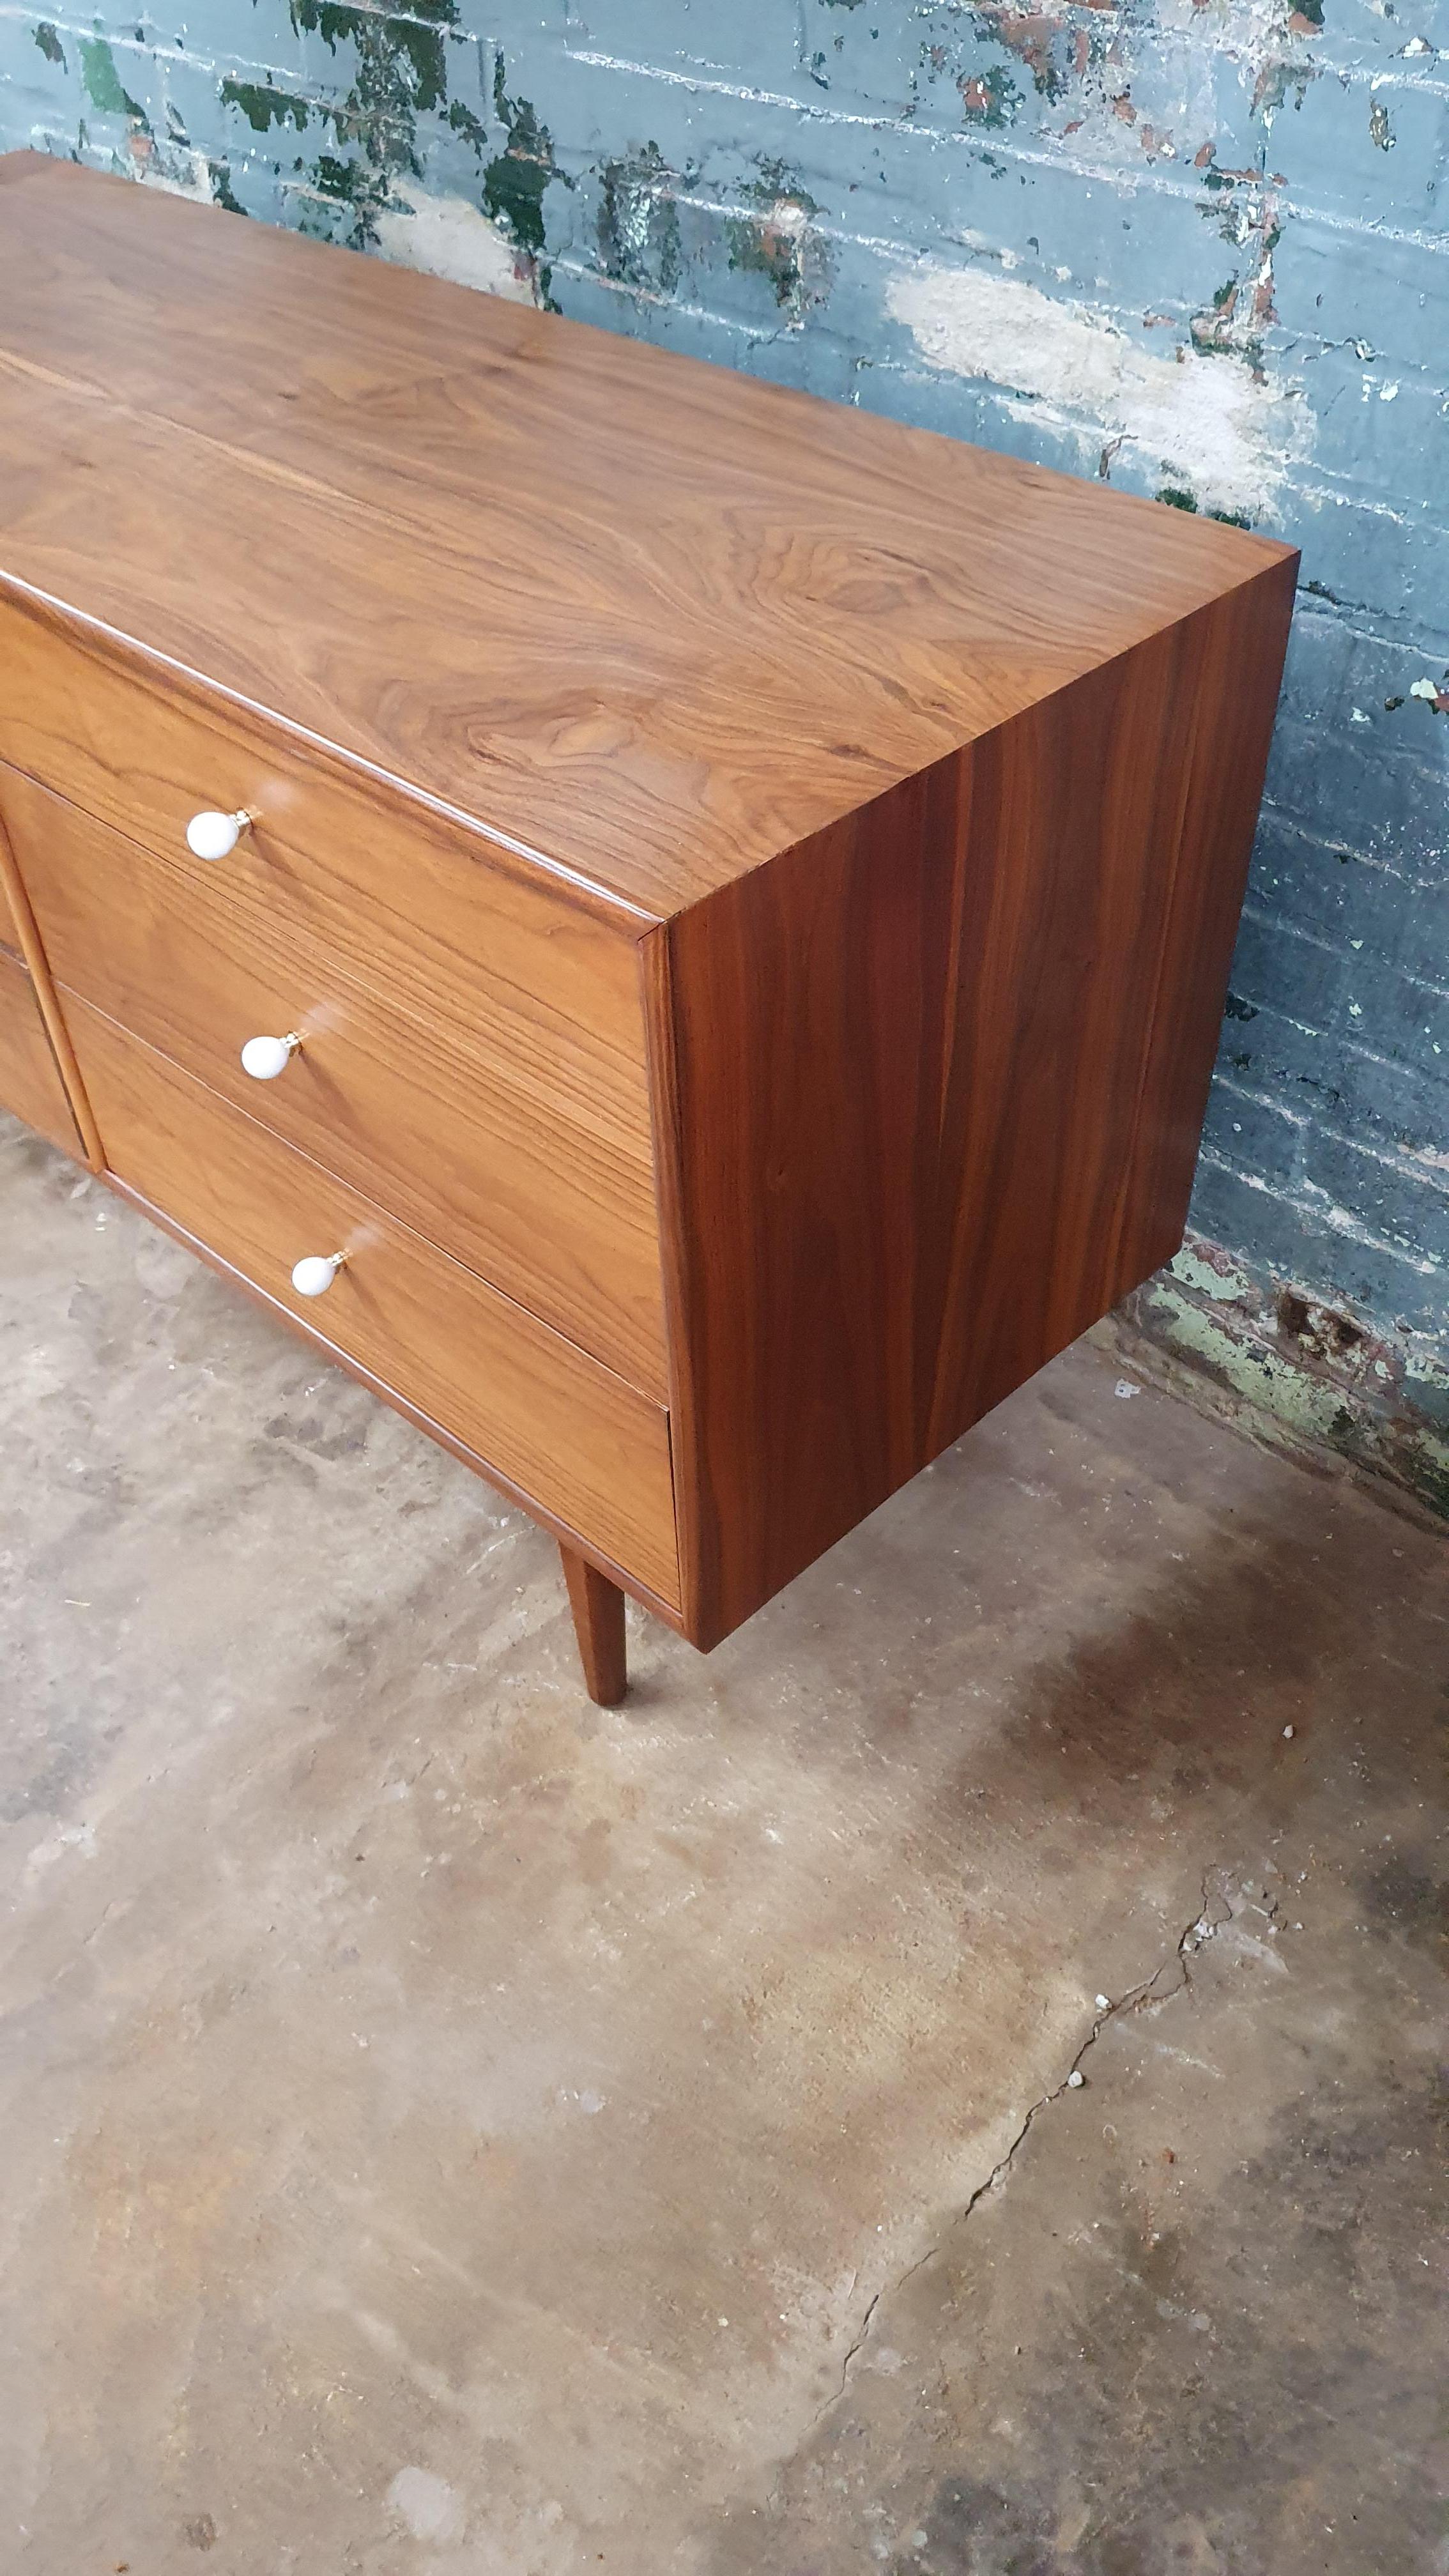 This Drexel Declaration 6-Drawer Dresser is a mid-century modern piece of furniture designed by Kipp Stewart and Stewart MacDougall for the Drexel Furniture Company in the 1950s. The dresser is a classic example of mid-century modern design,